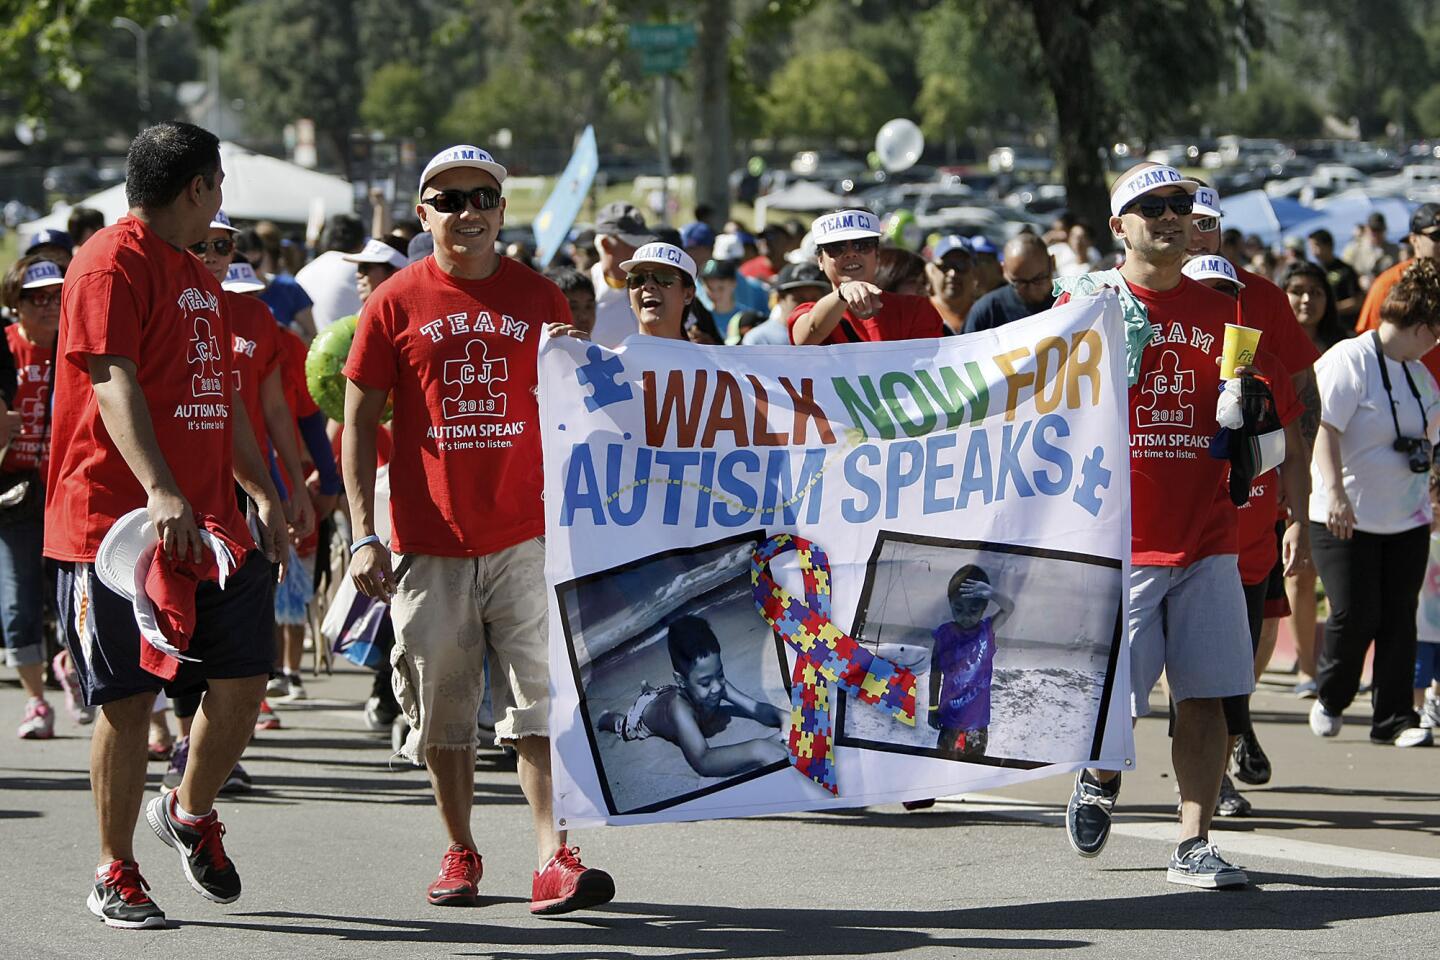 Team CJ 2013 members carried a large sign as they walked around the Rose Bowl during the 11th Annual Walk Now For Autism Speaks in Pasadena on Saturday, April 20, 2013. About 40,000 people were expected to participate in the fundraiser for autism research, advocacy and family services.